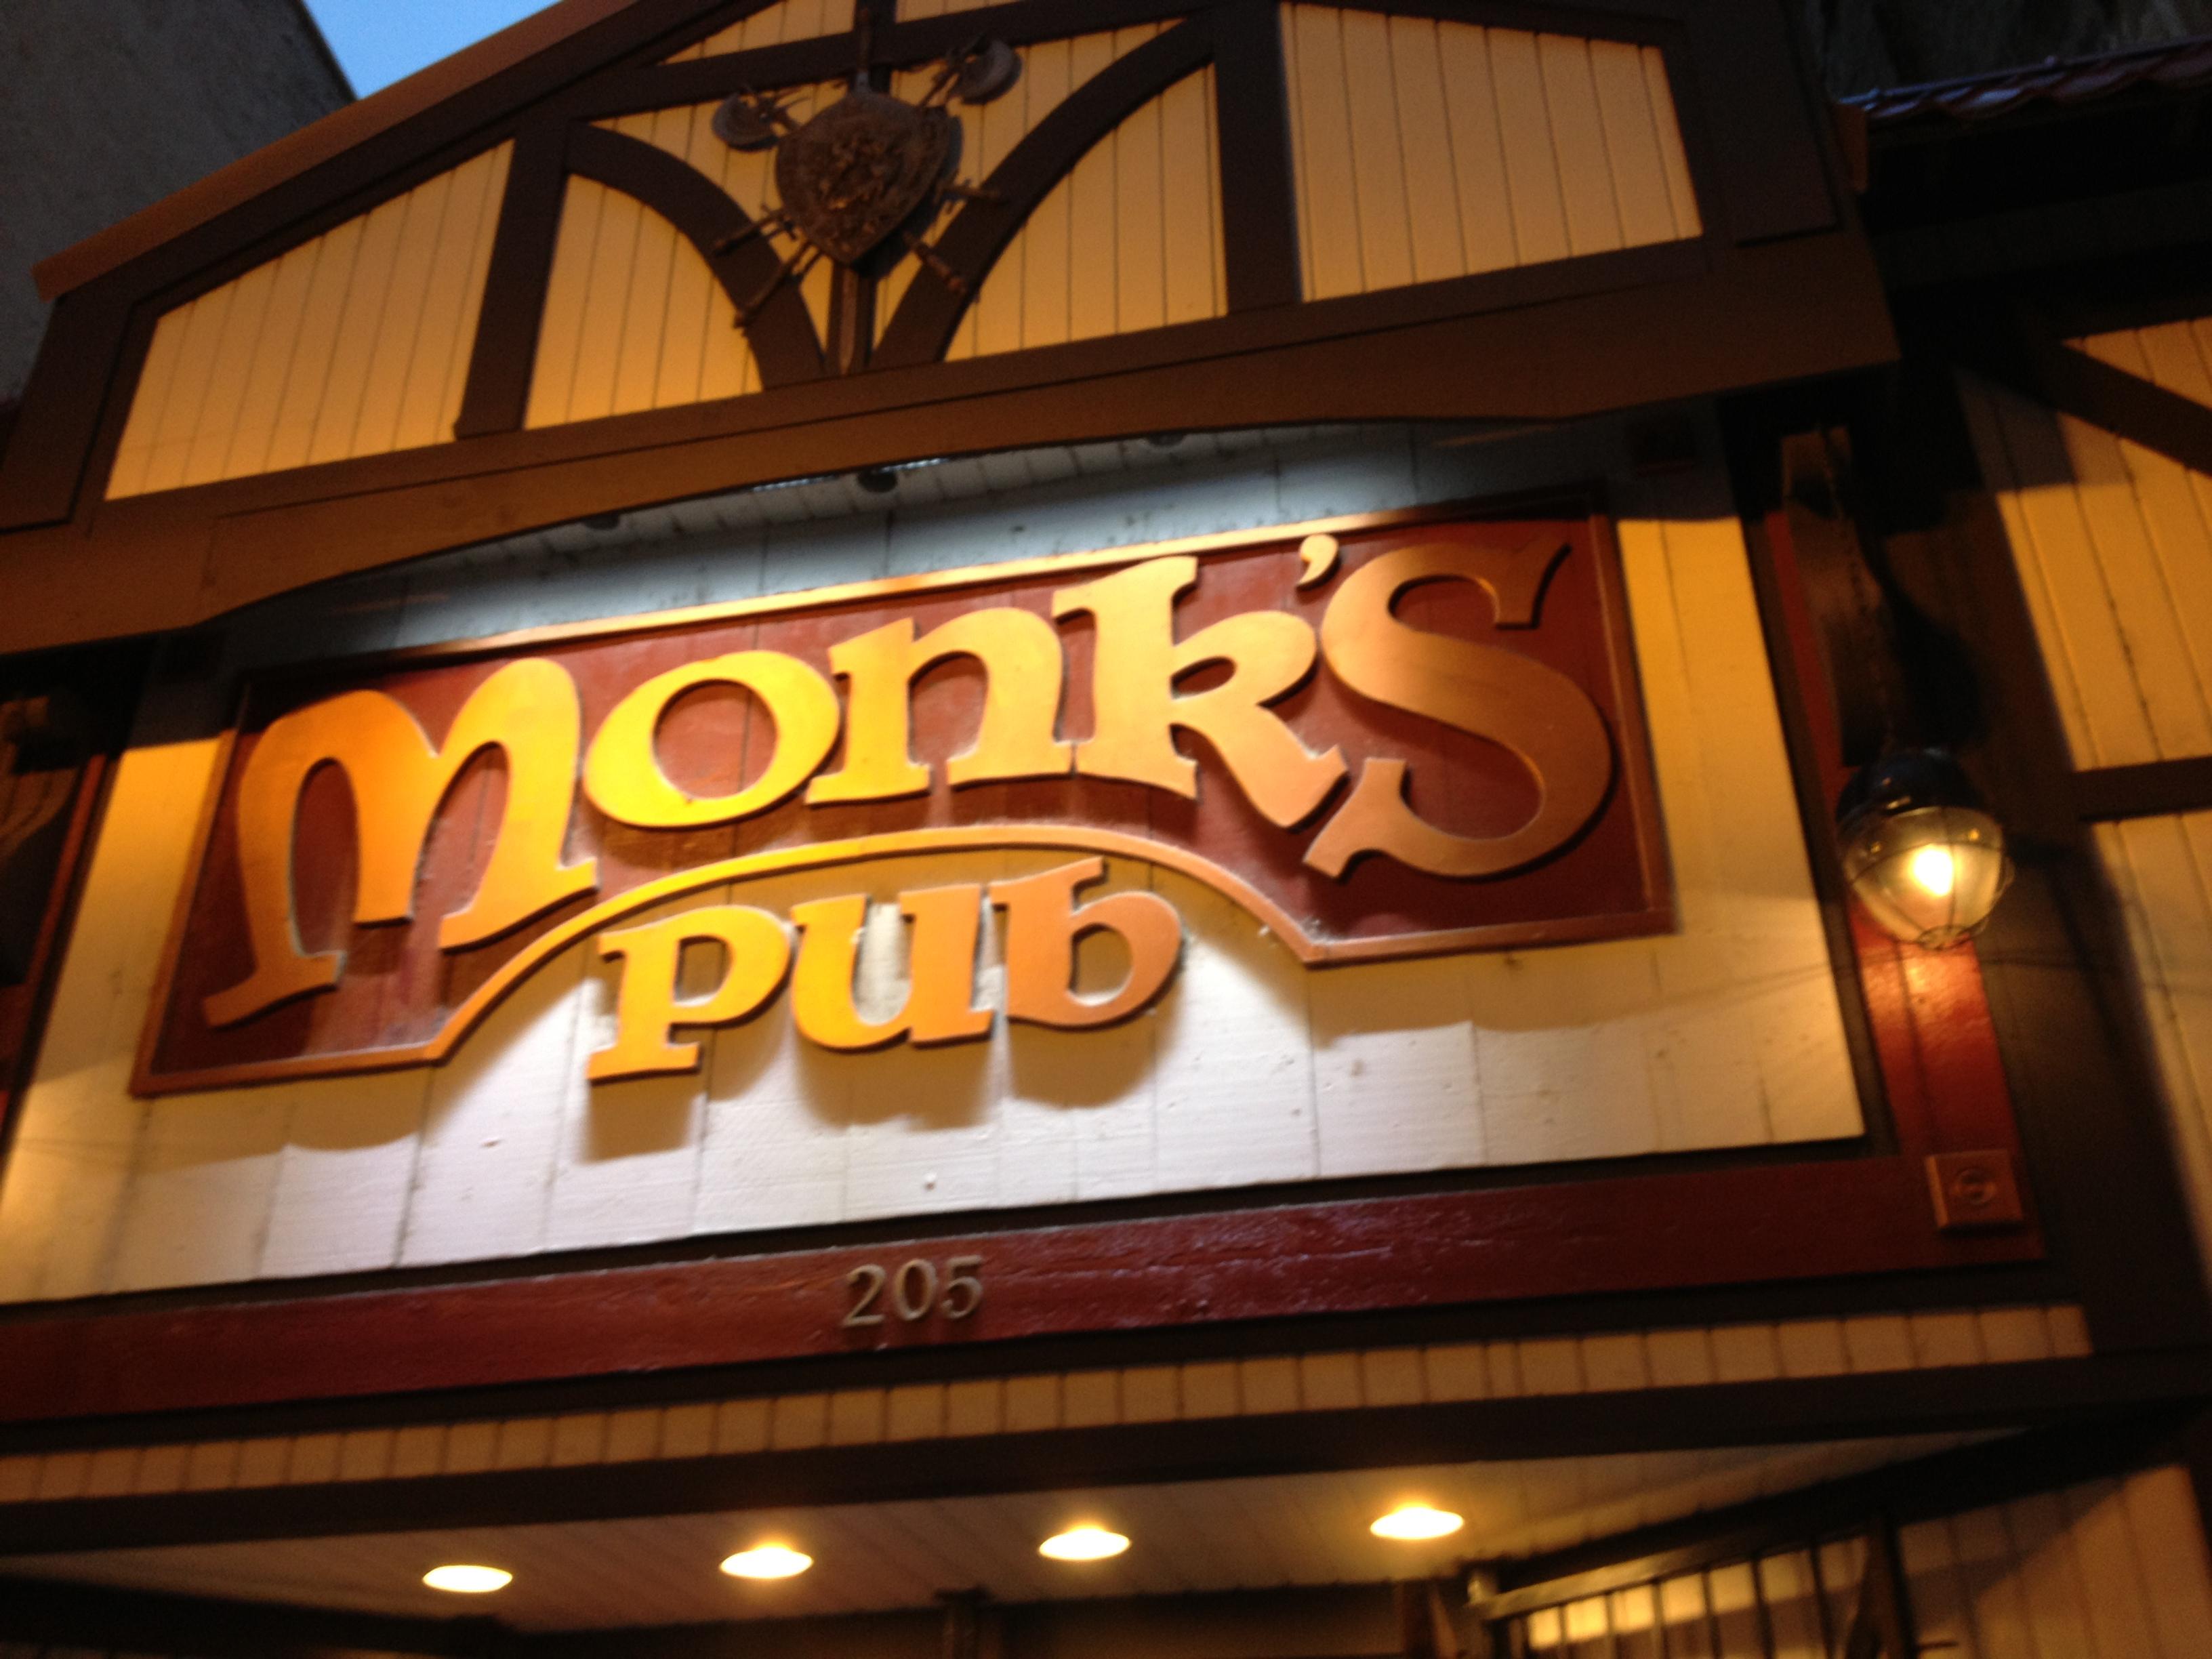 Cover image of this place Monk's Pub